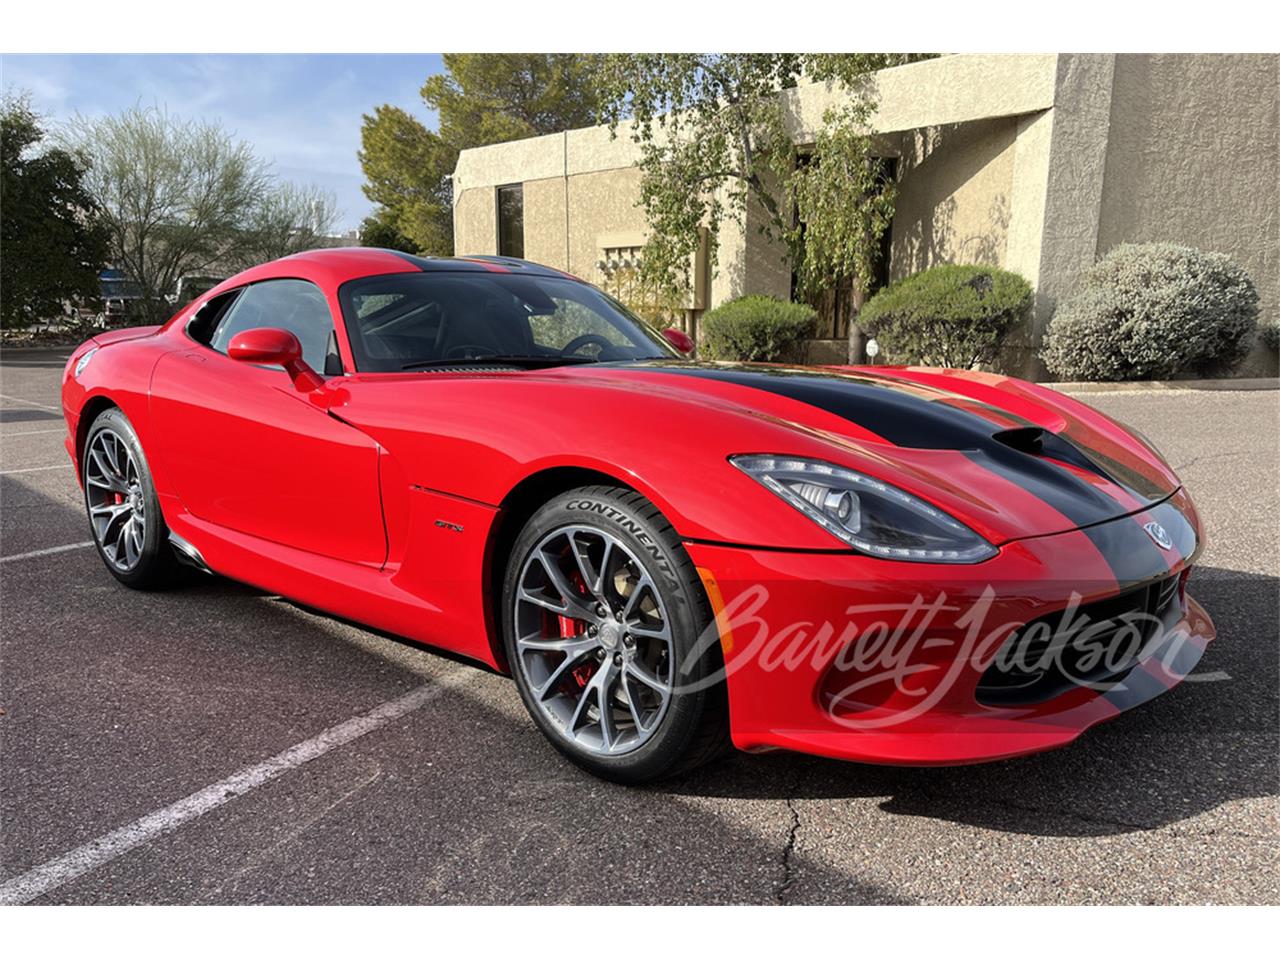 For Sale at Auction: 2014 Dodge Viper in Scottsdale, Arizona for sale in Scottsdale, AZ